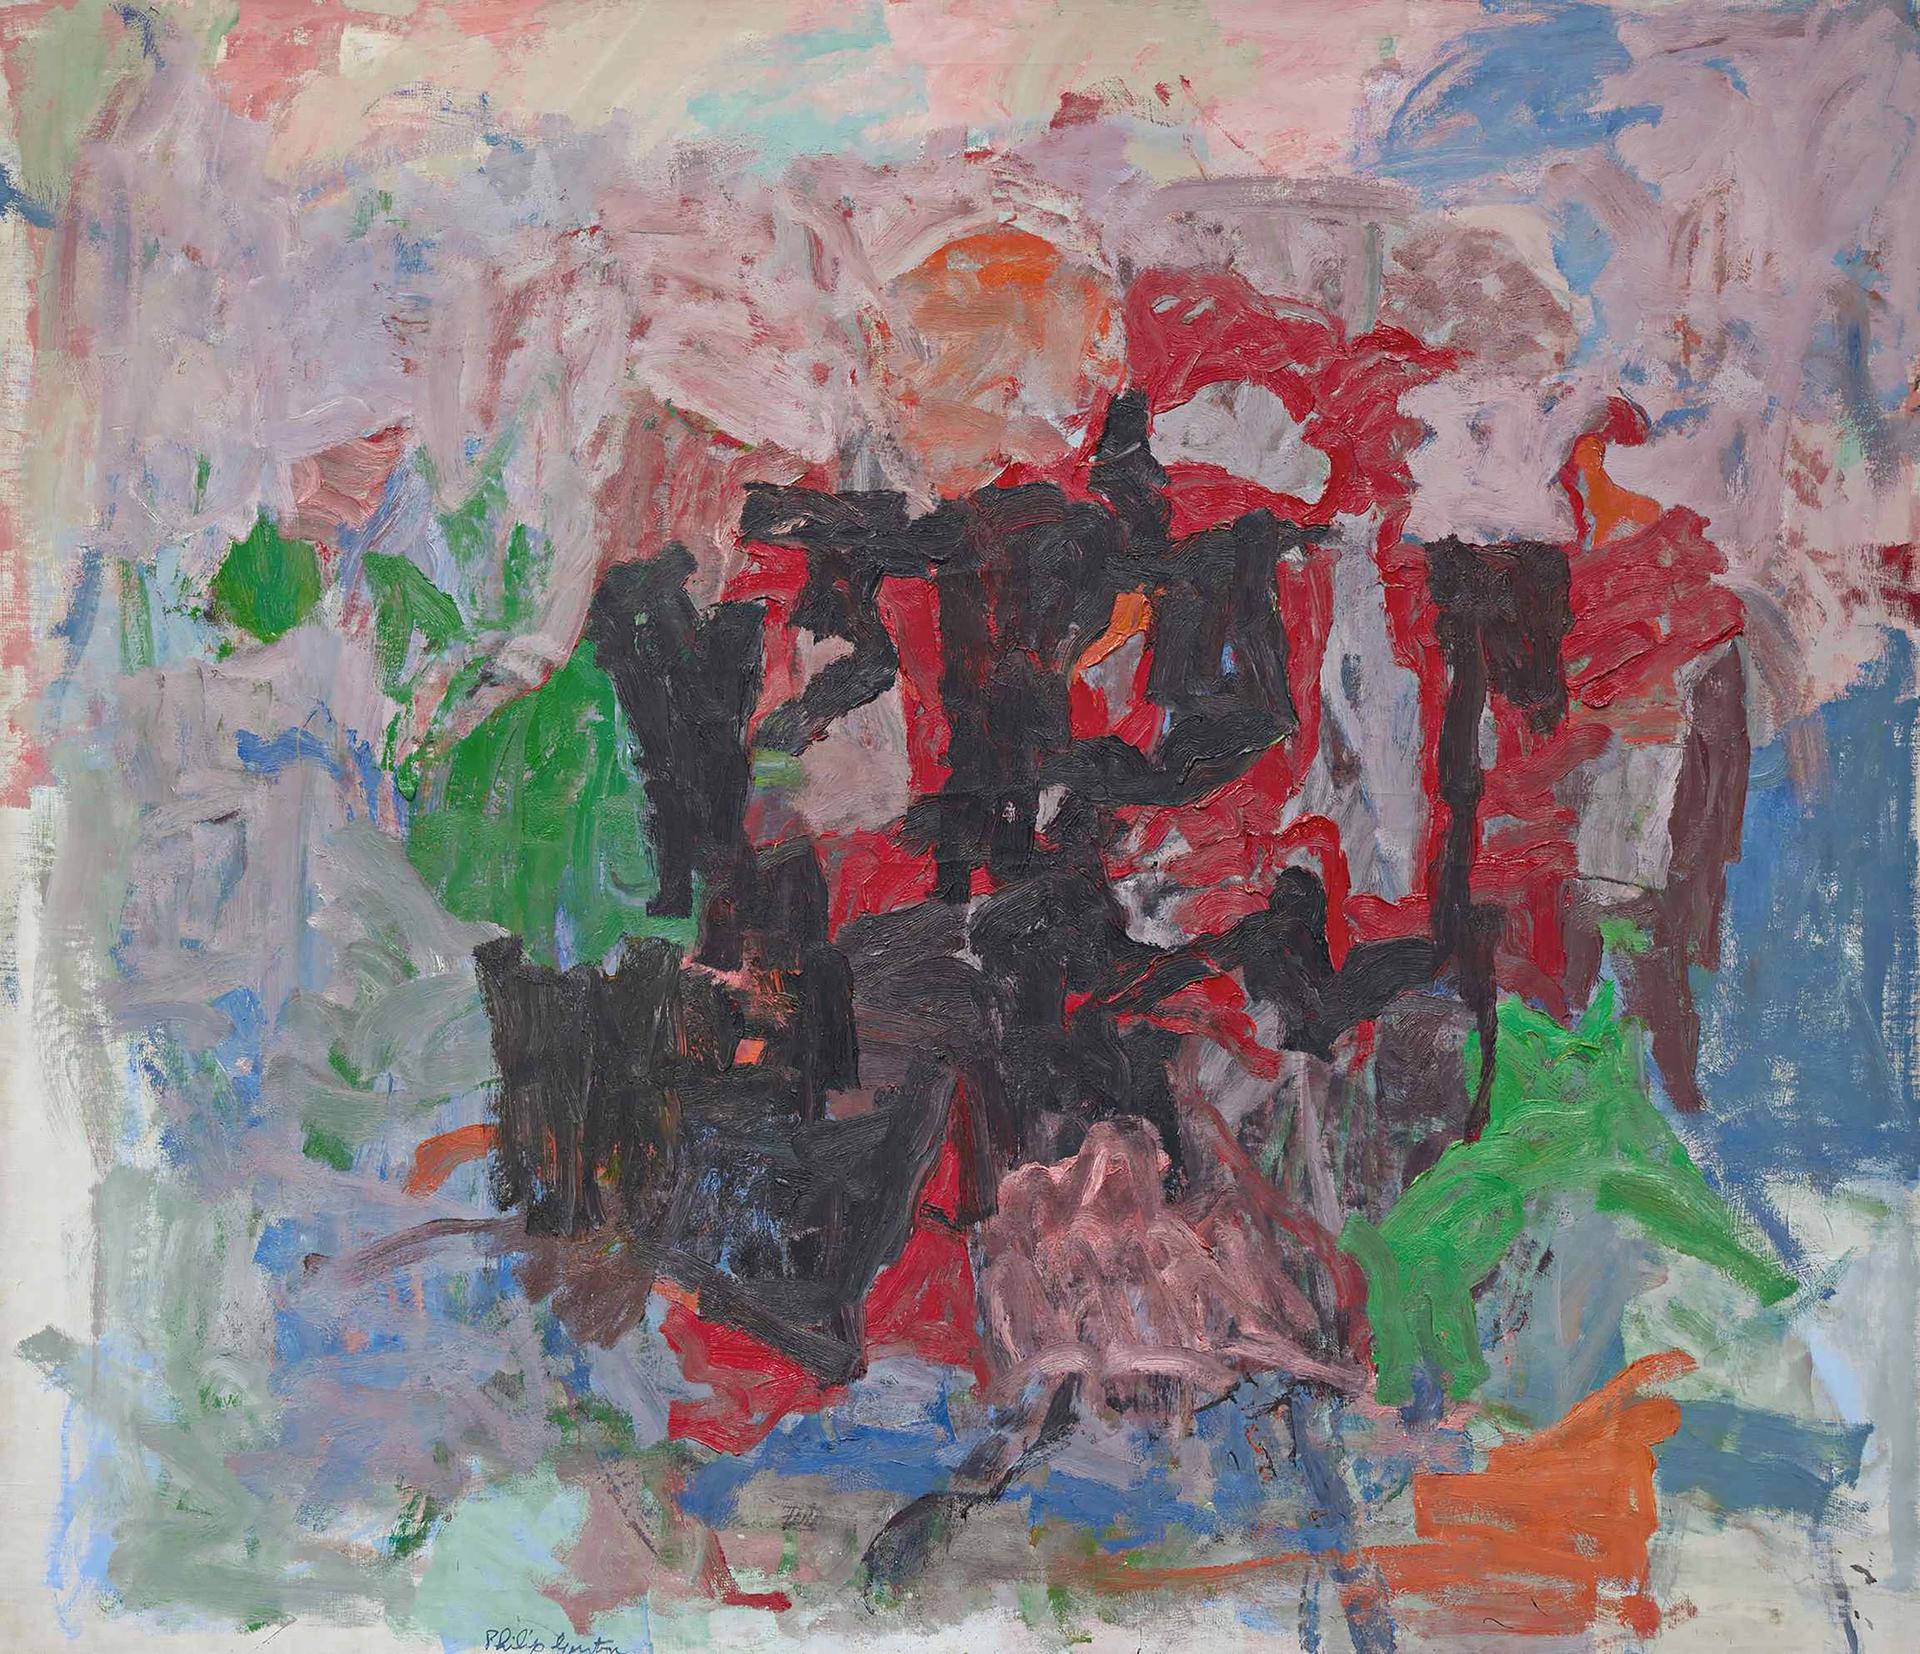 Philip Guston's Nile (1957) will be offered at Sotheby's New York for between $20m and $30m. Courtesy of Sotheby's